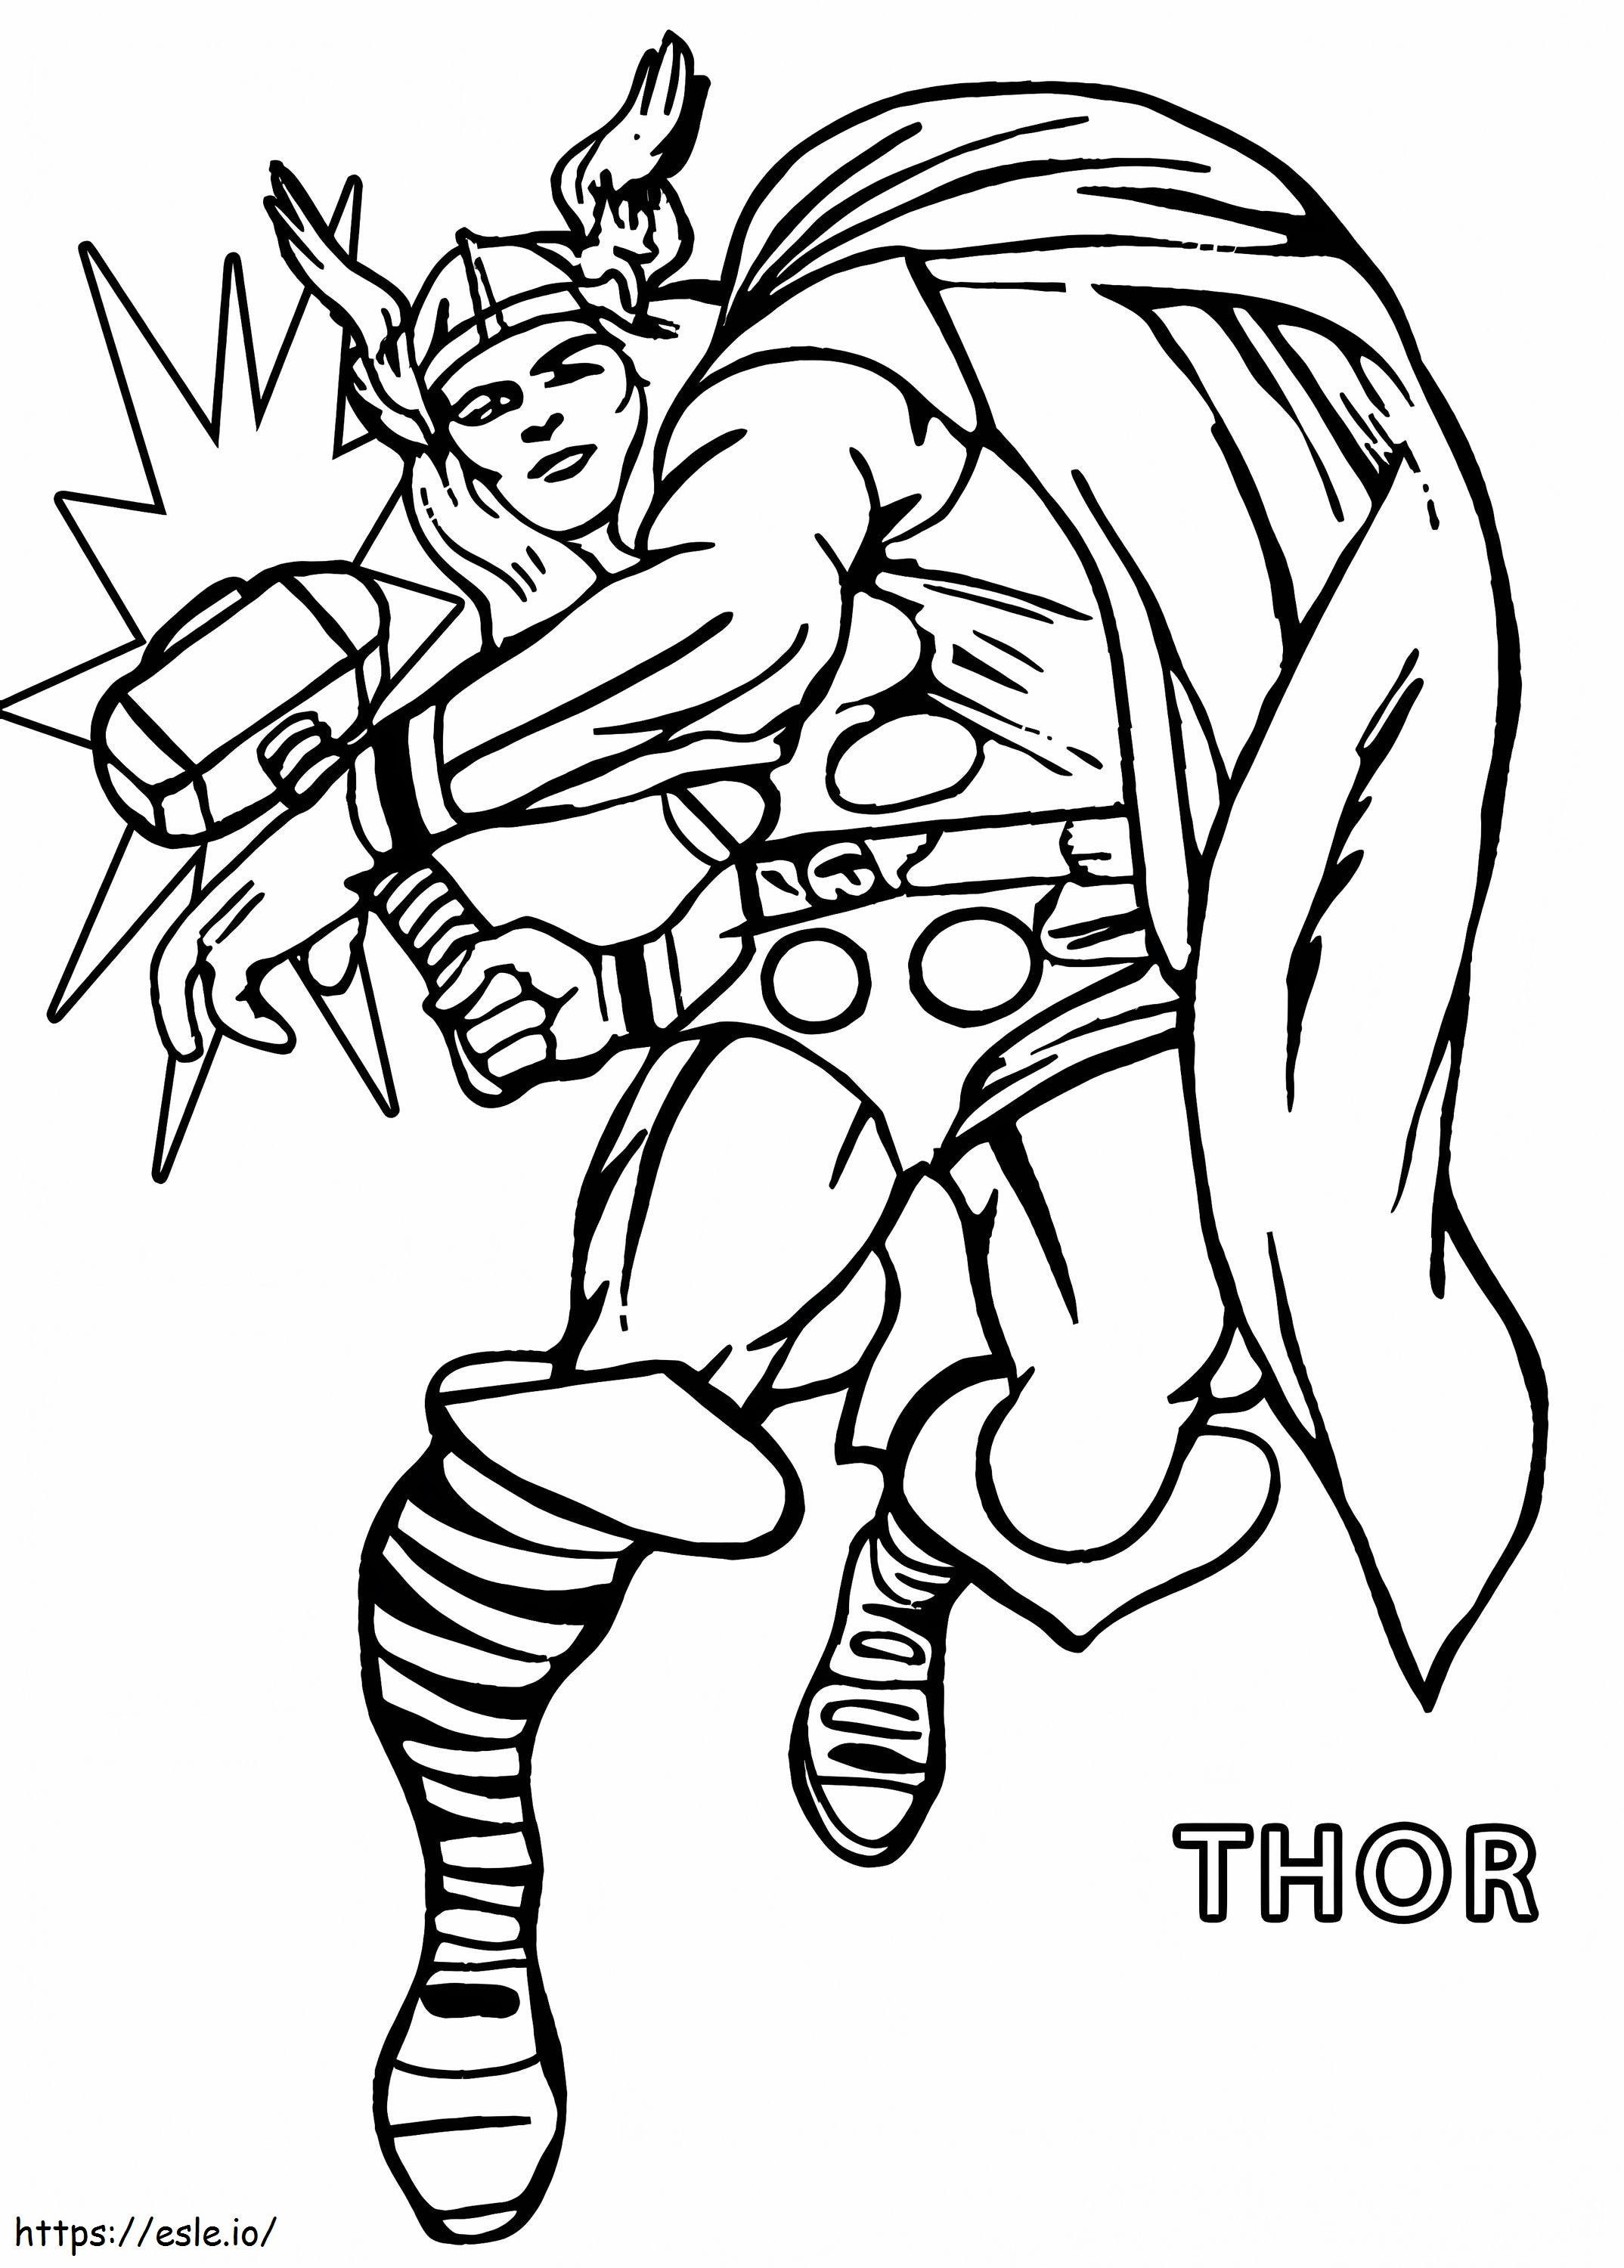 Animated Thor coloring page